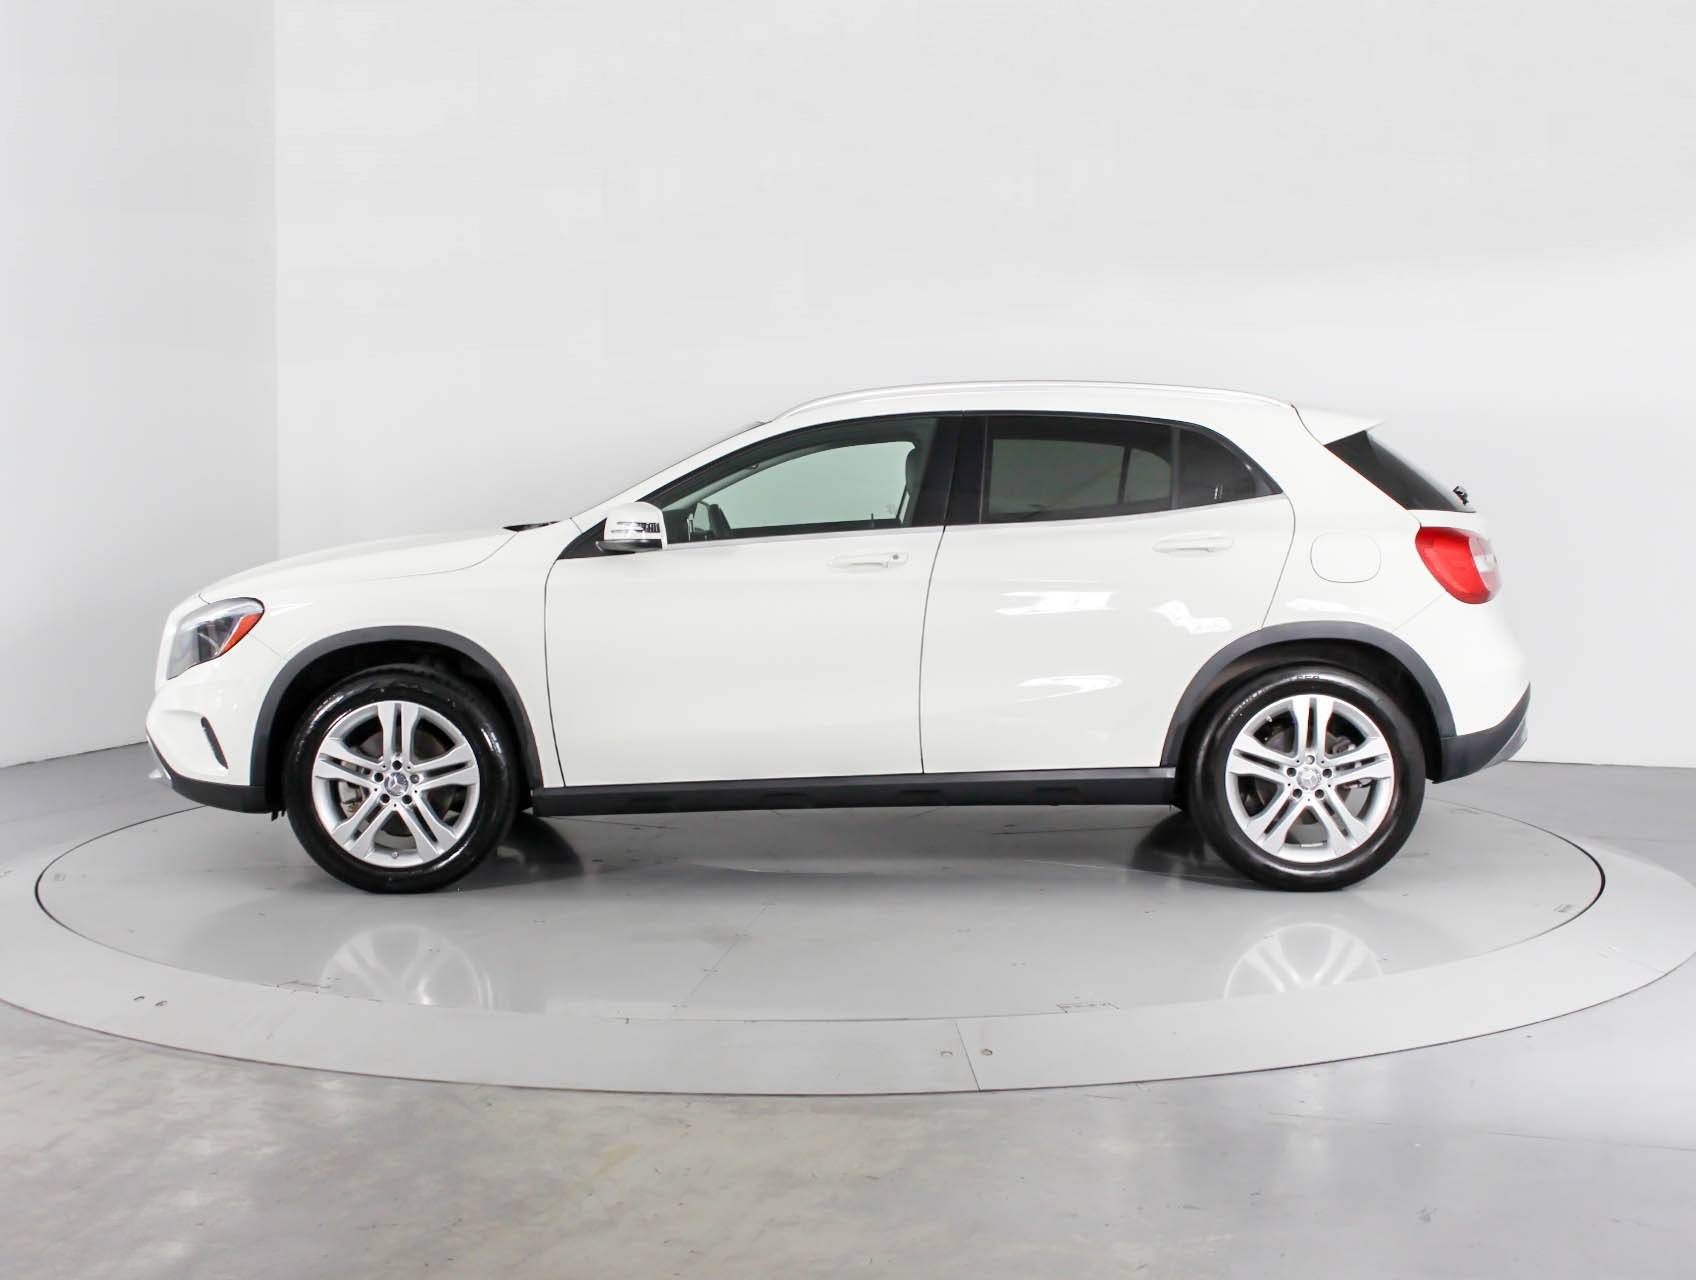 Used 2015 Mercedes Benz Gla Class Gla250 4matic Suv For Sale